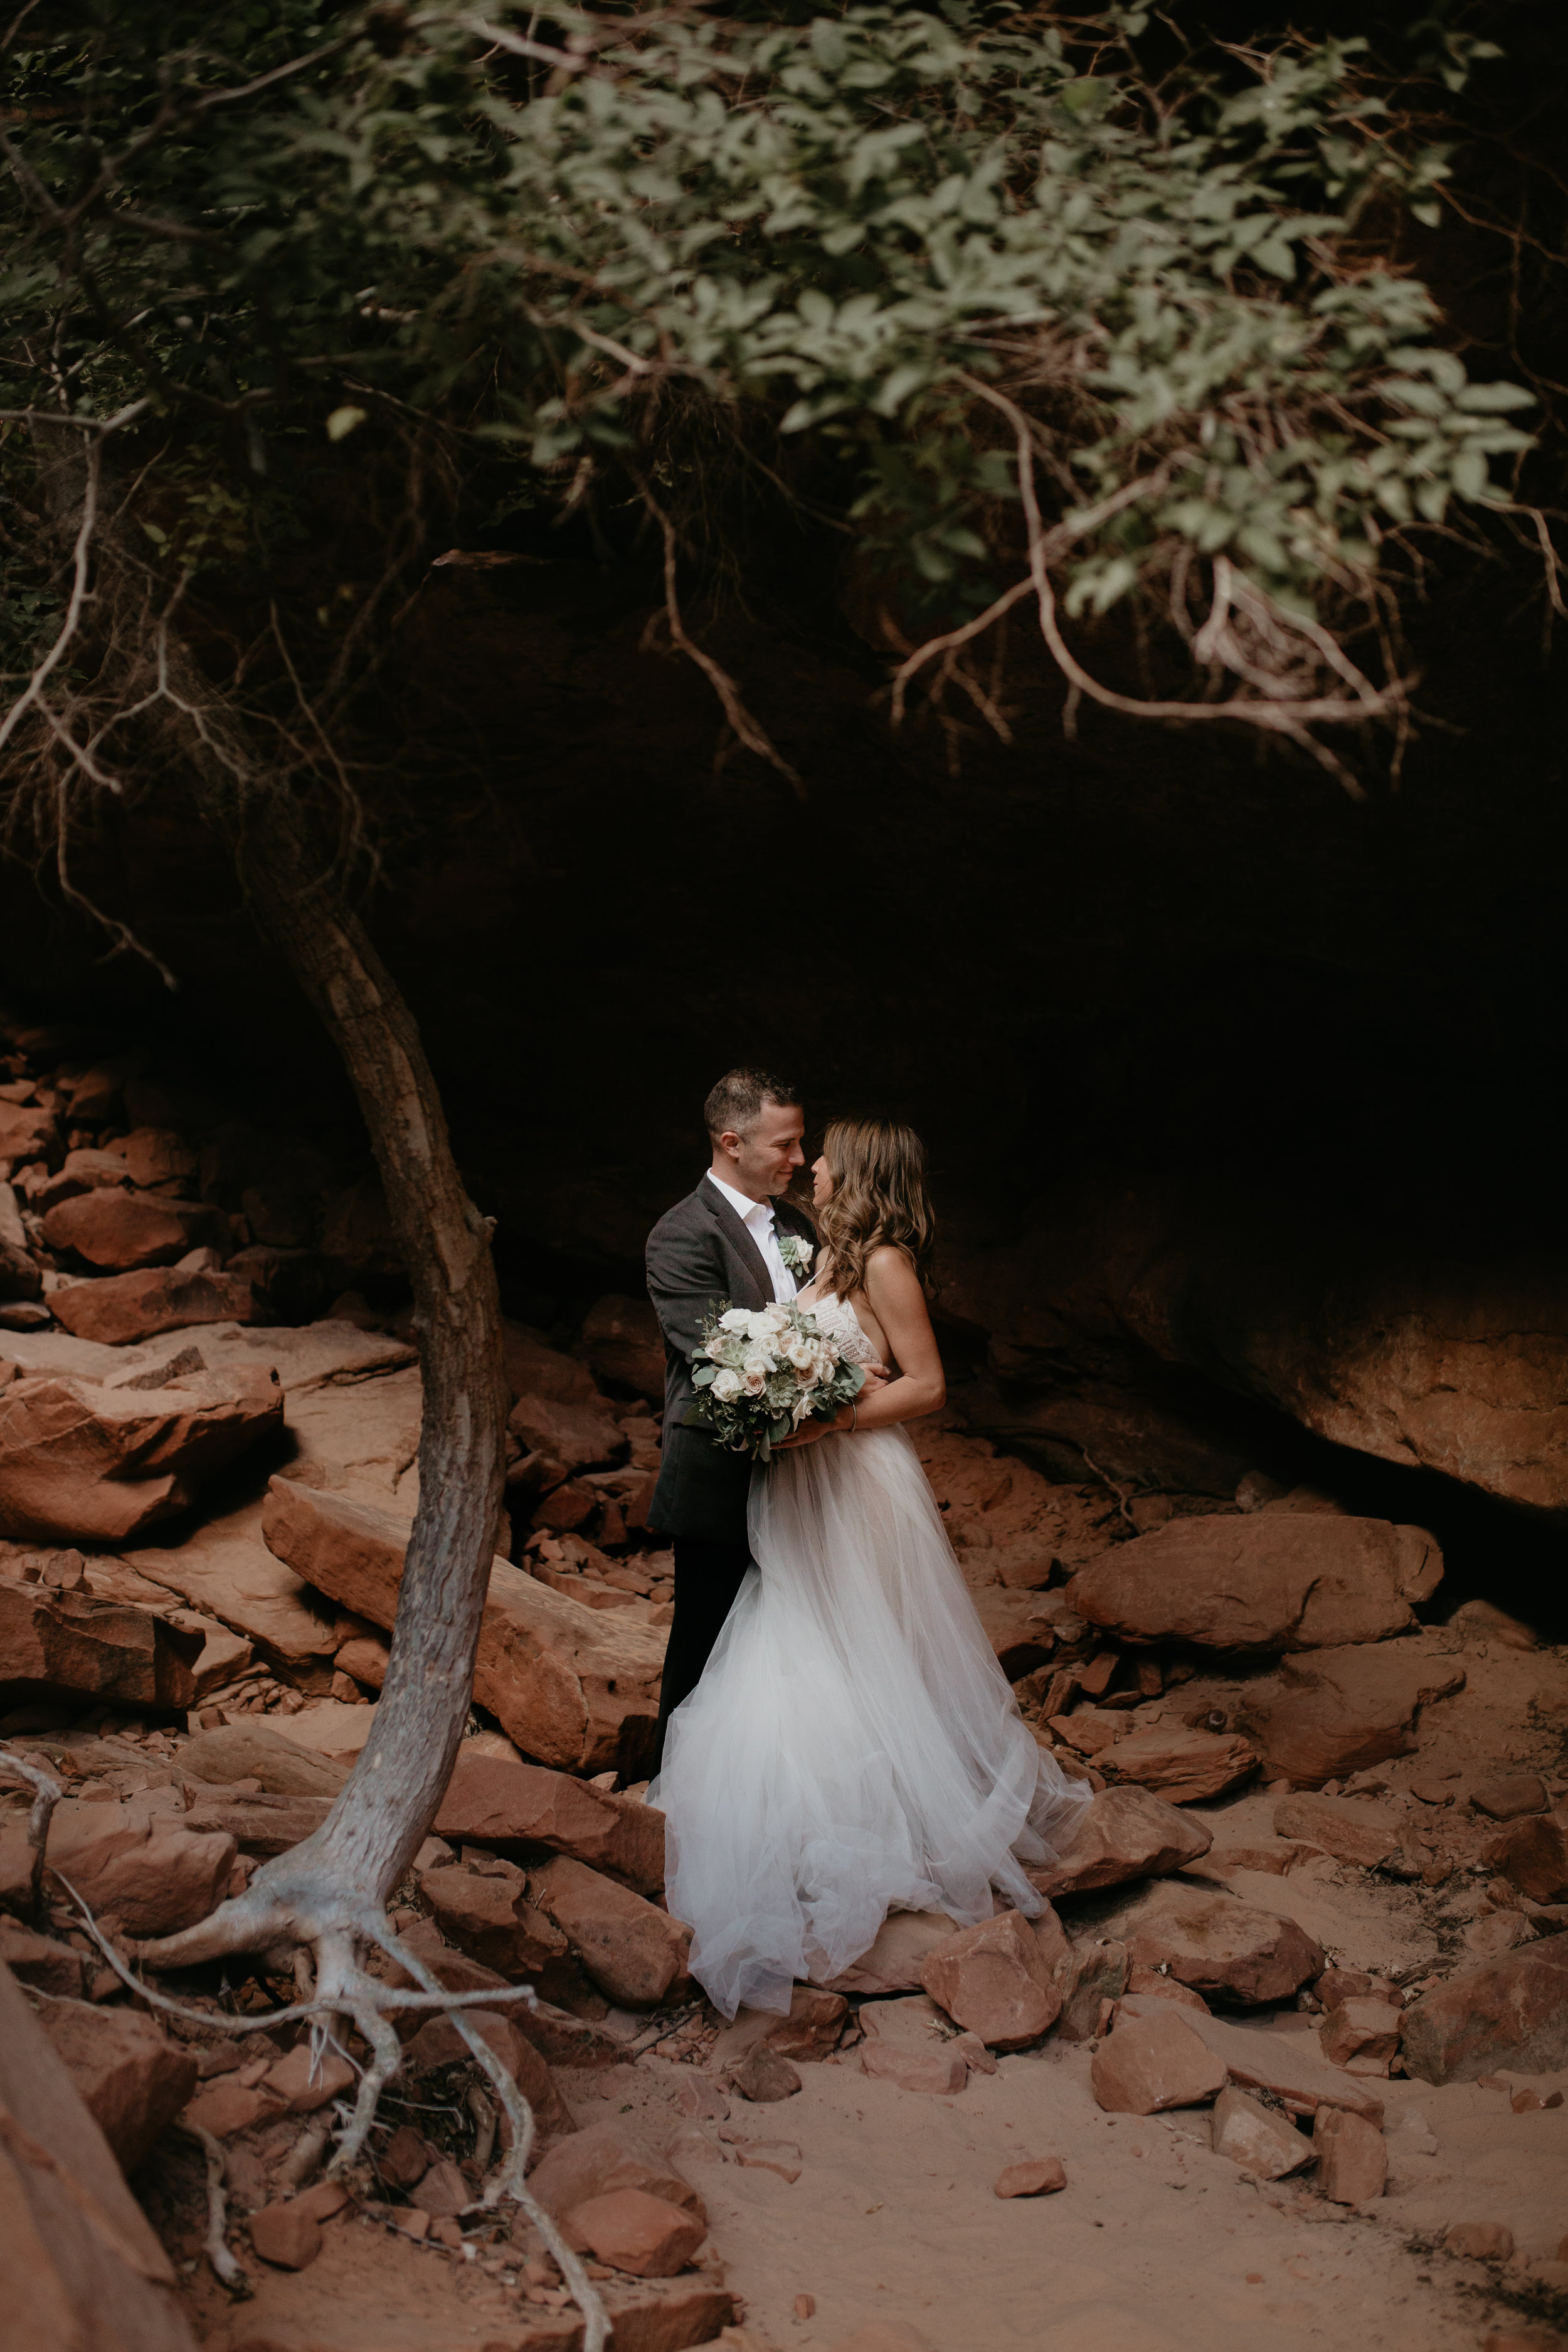 nicole-daacke-photography-zion-national-park-elopement-photographer-canyon-overlook-trail-elope-hiking-adventure-wedding-photos-fall-utah-red-rock-canyon-stgeorge-eloping-photographer-31.jpg